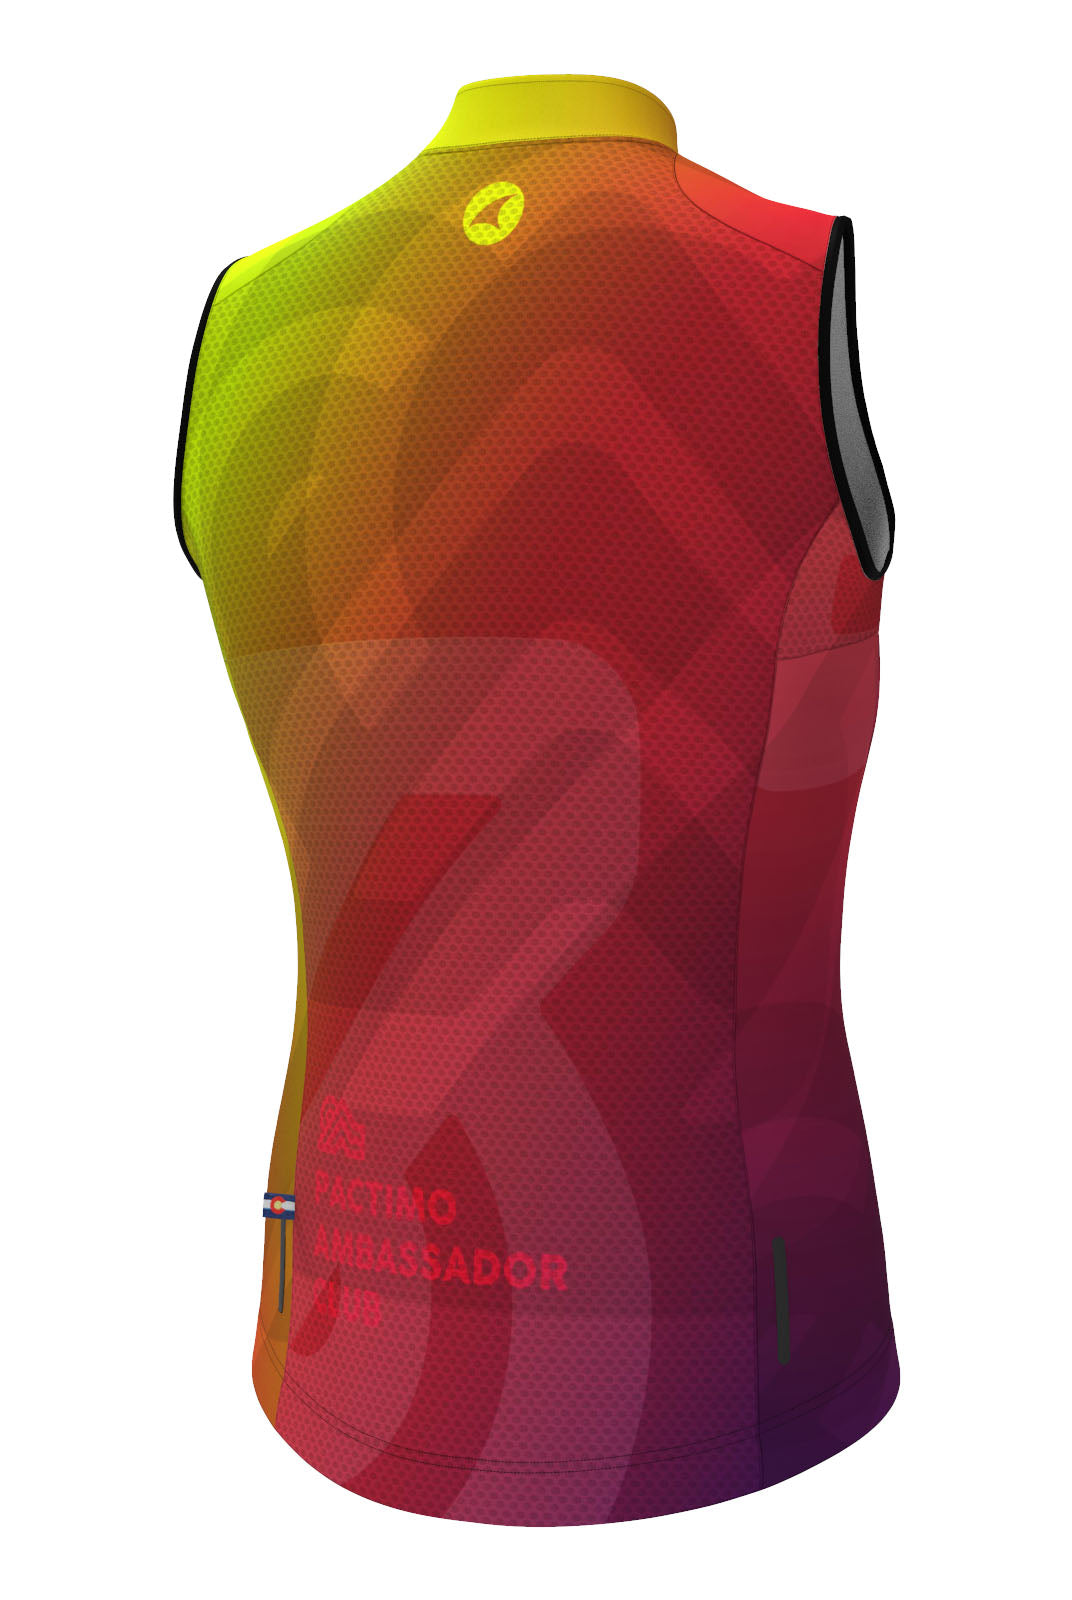 Women's PAC Divide Cycling Wind Vest - Warm Fade Back